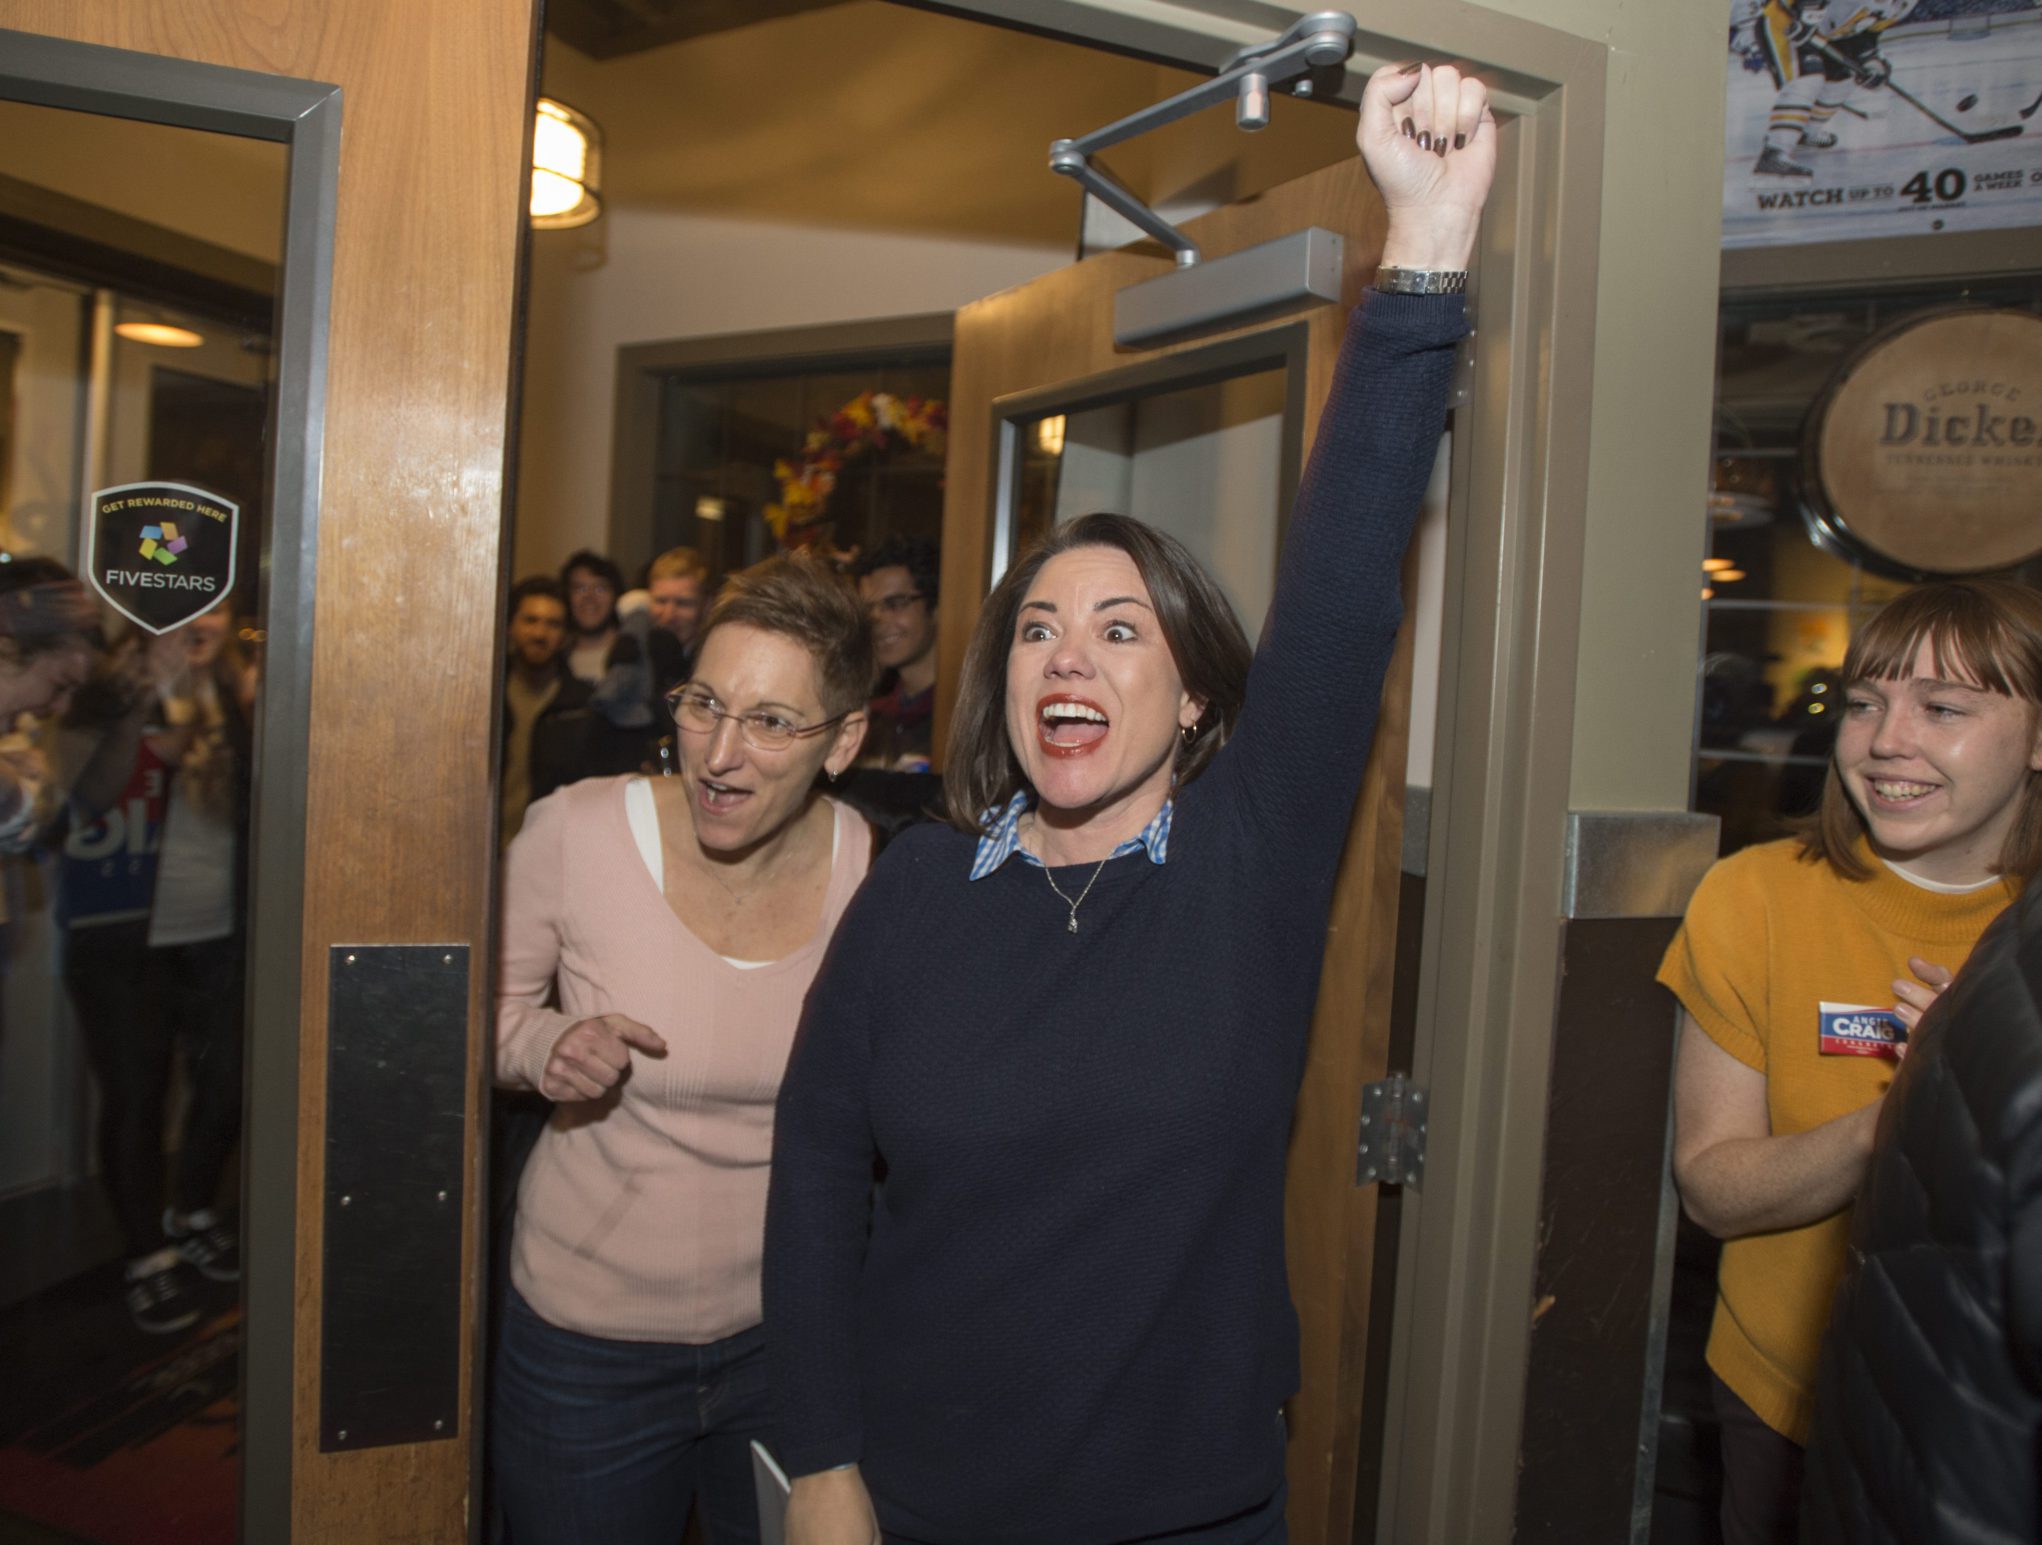 U.S. Representative Angie Craig celebrates her win in the 2018 mid-term general election with her wife, Cheryl Greene.